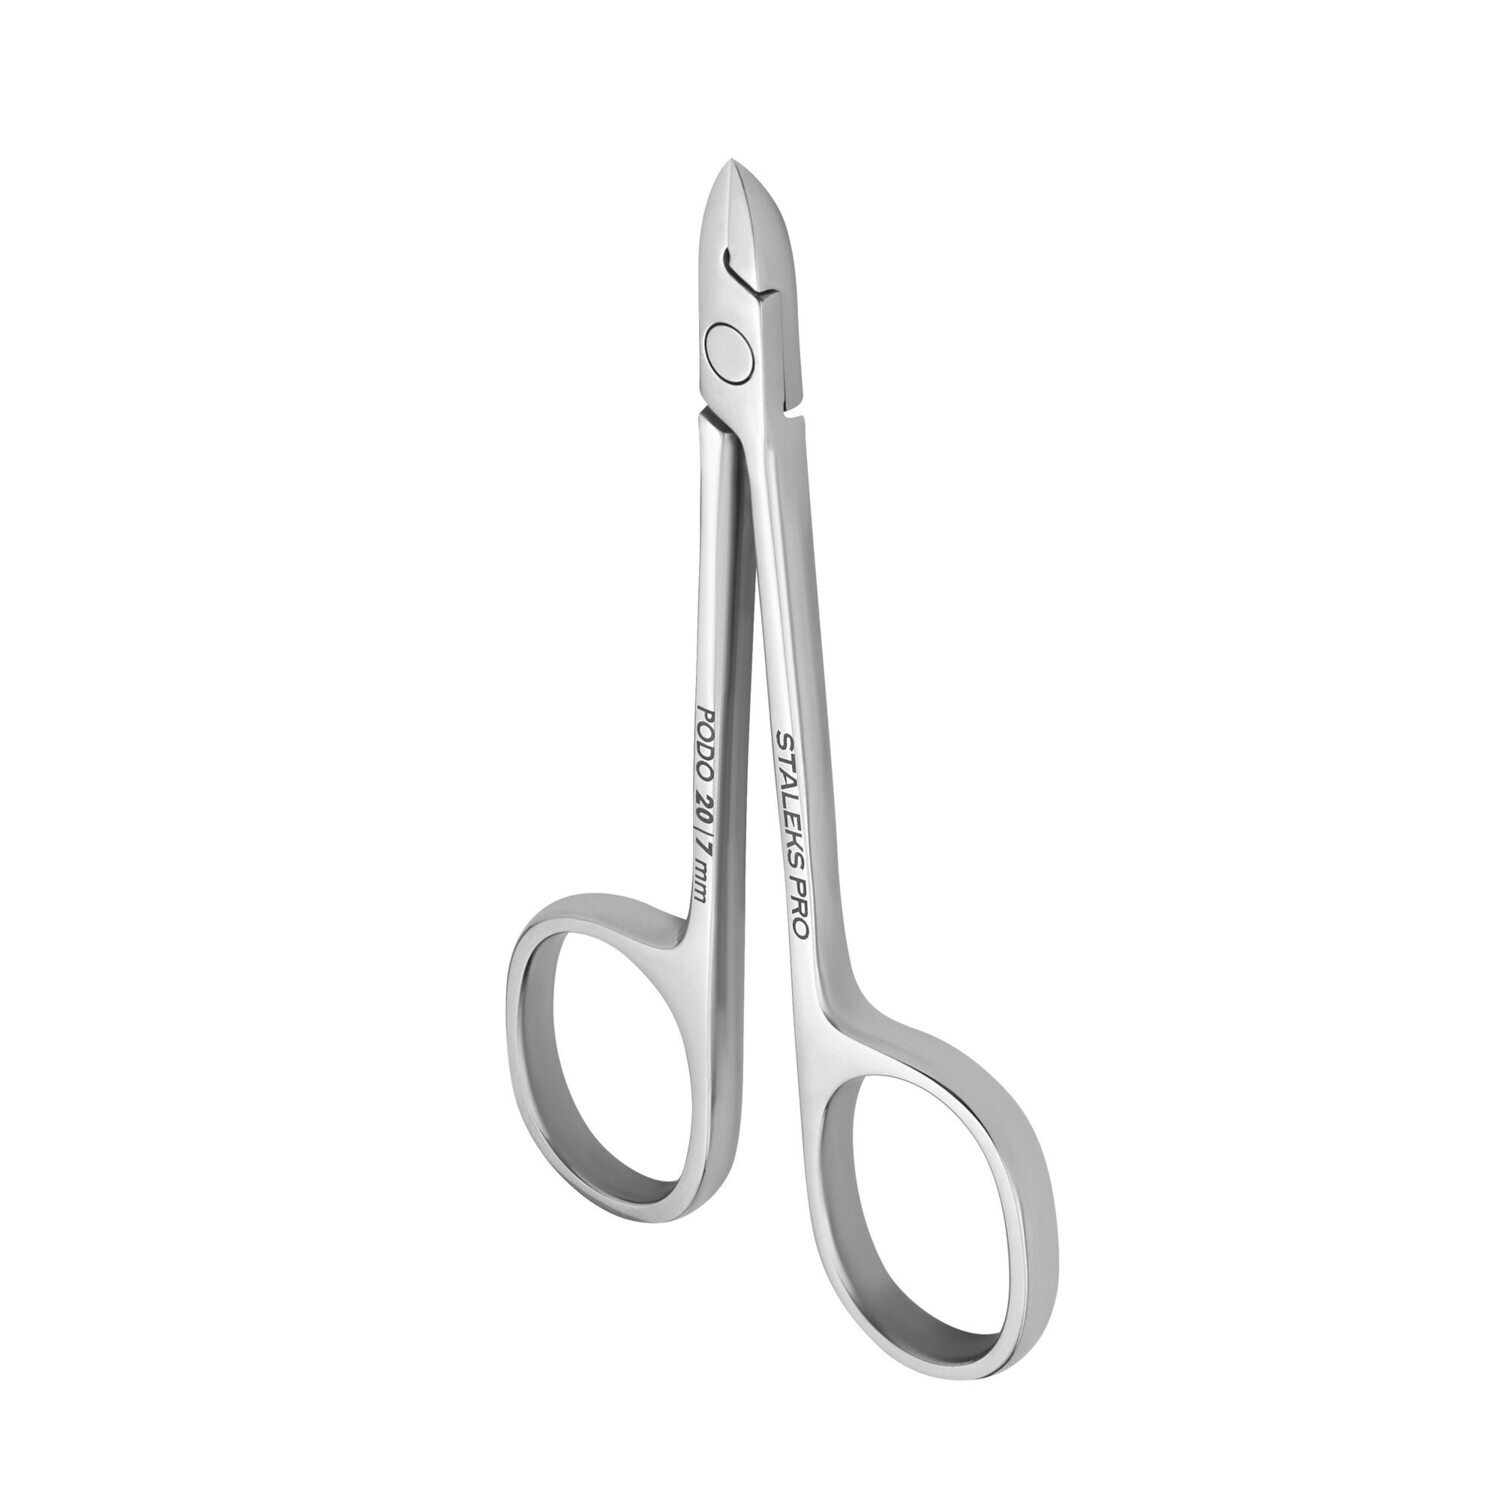 Podology scissors style nippers for cuticle and callus PODO 20 7 mm